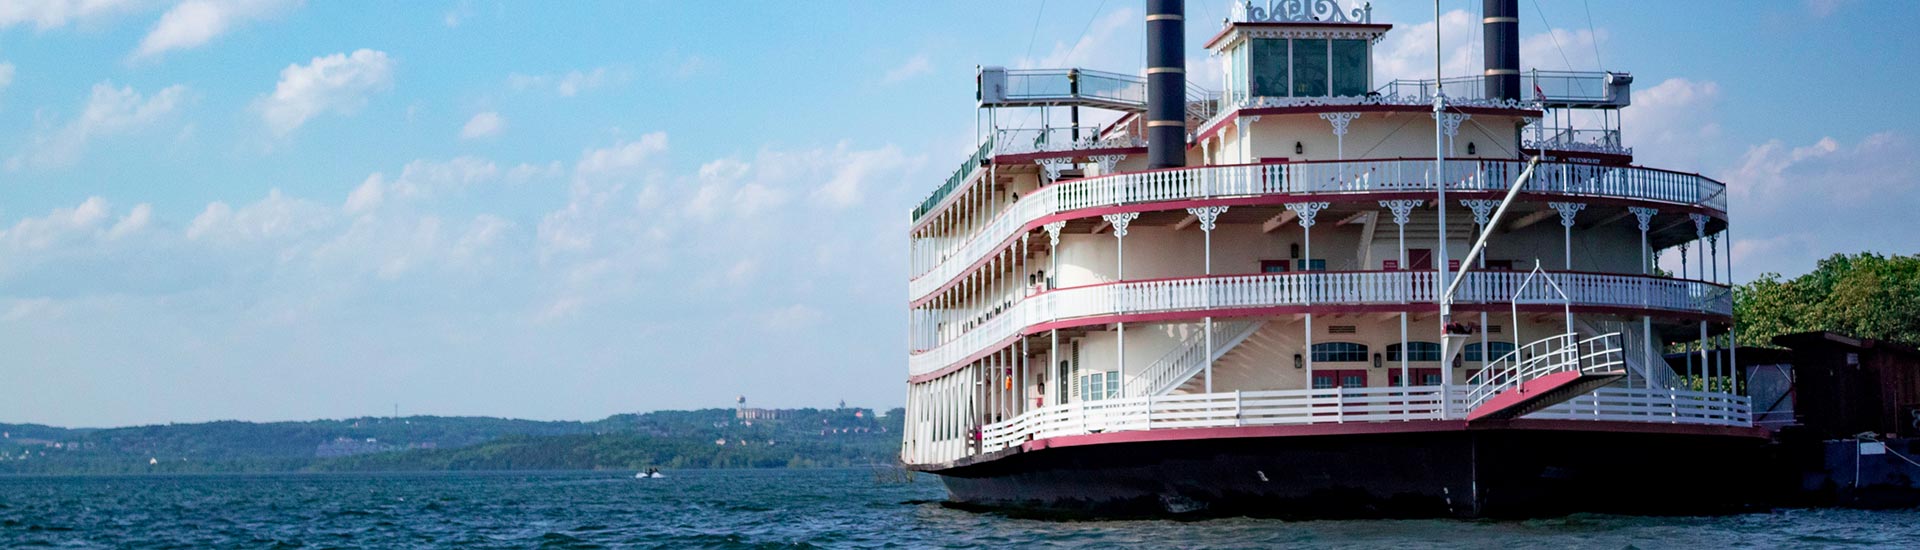 Front of the Branson Belle Showboat as it sits along the shores of Table Rock Lake, surrounded by blue waters and a summer sky.